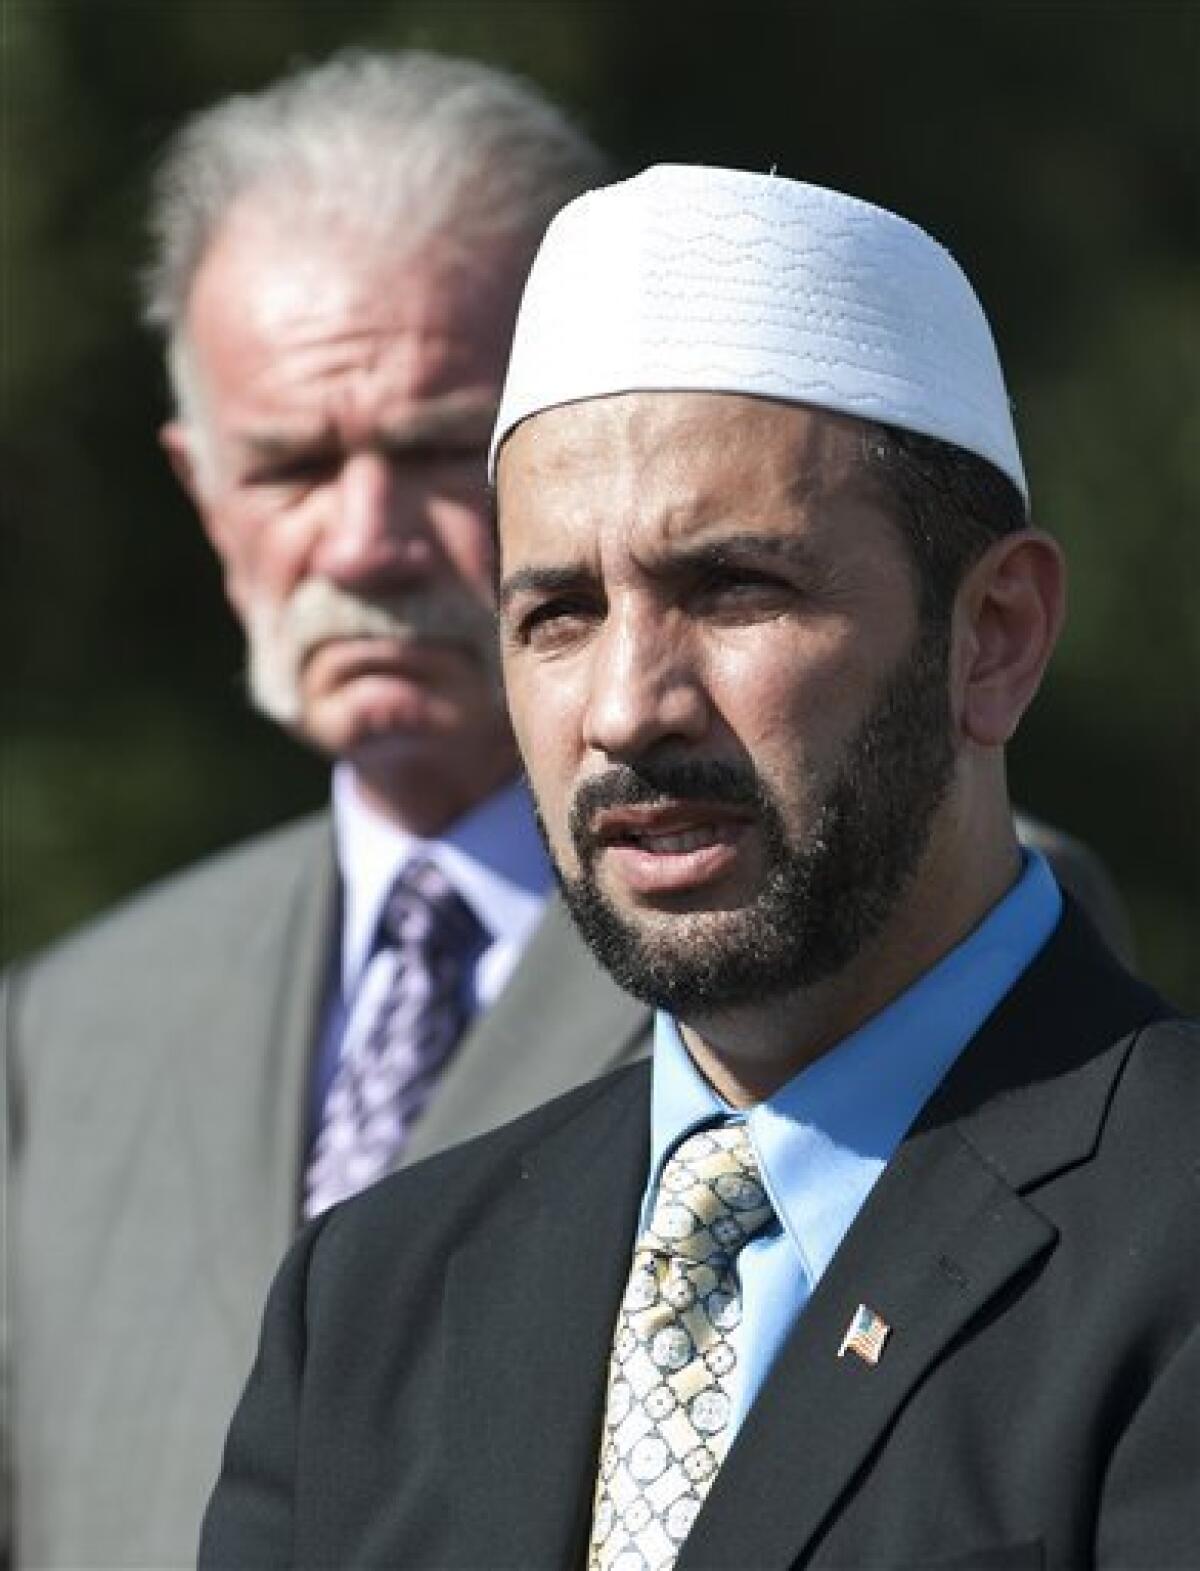 Imam Muhammad Musri of the Islamic Society of Central Florida, right, speaks to the media as Pastor Terry Jones of the Dove World Outreach Center looks, Thursday, Sept. 9, 2010, in Gainesville, Fla. (AP Photo/Phil Sandlin)